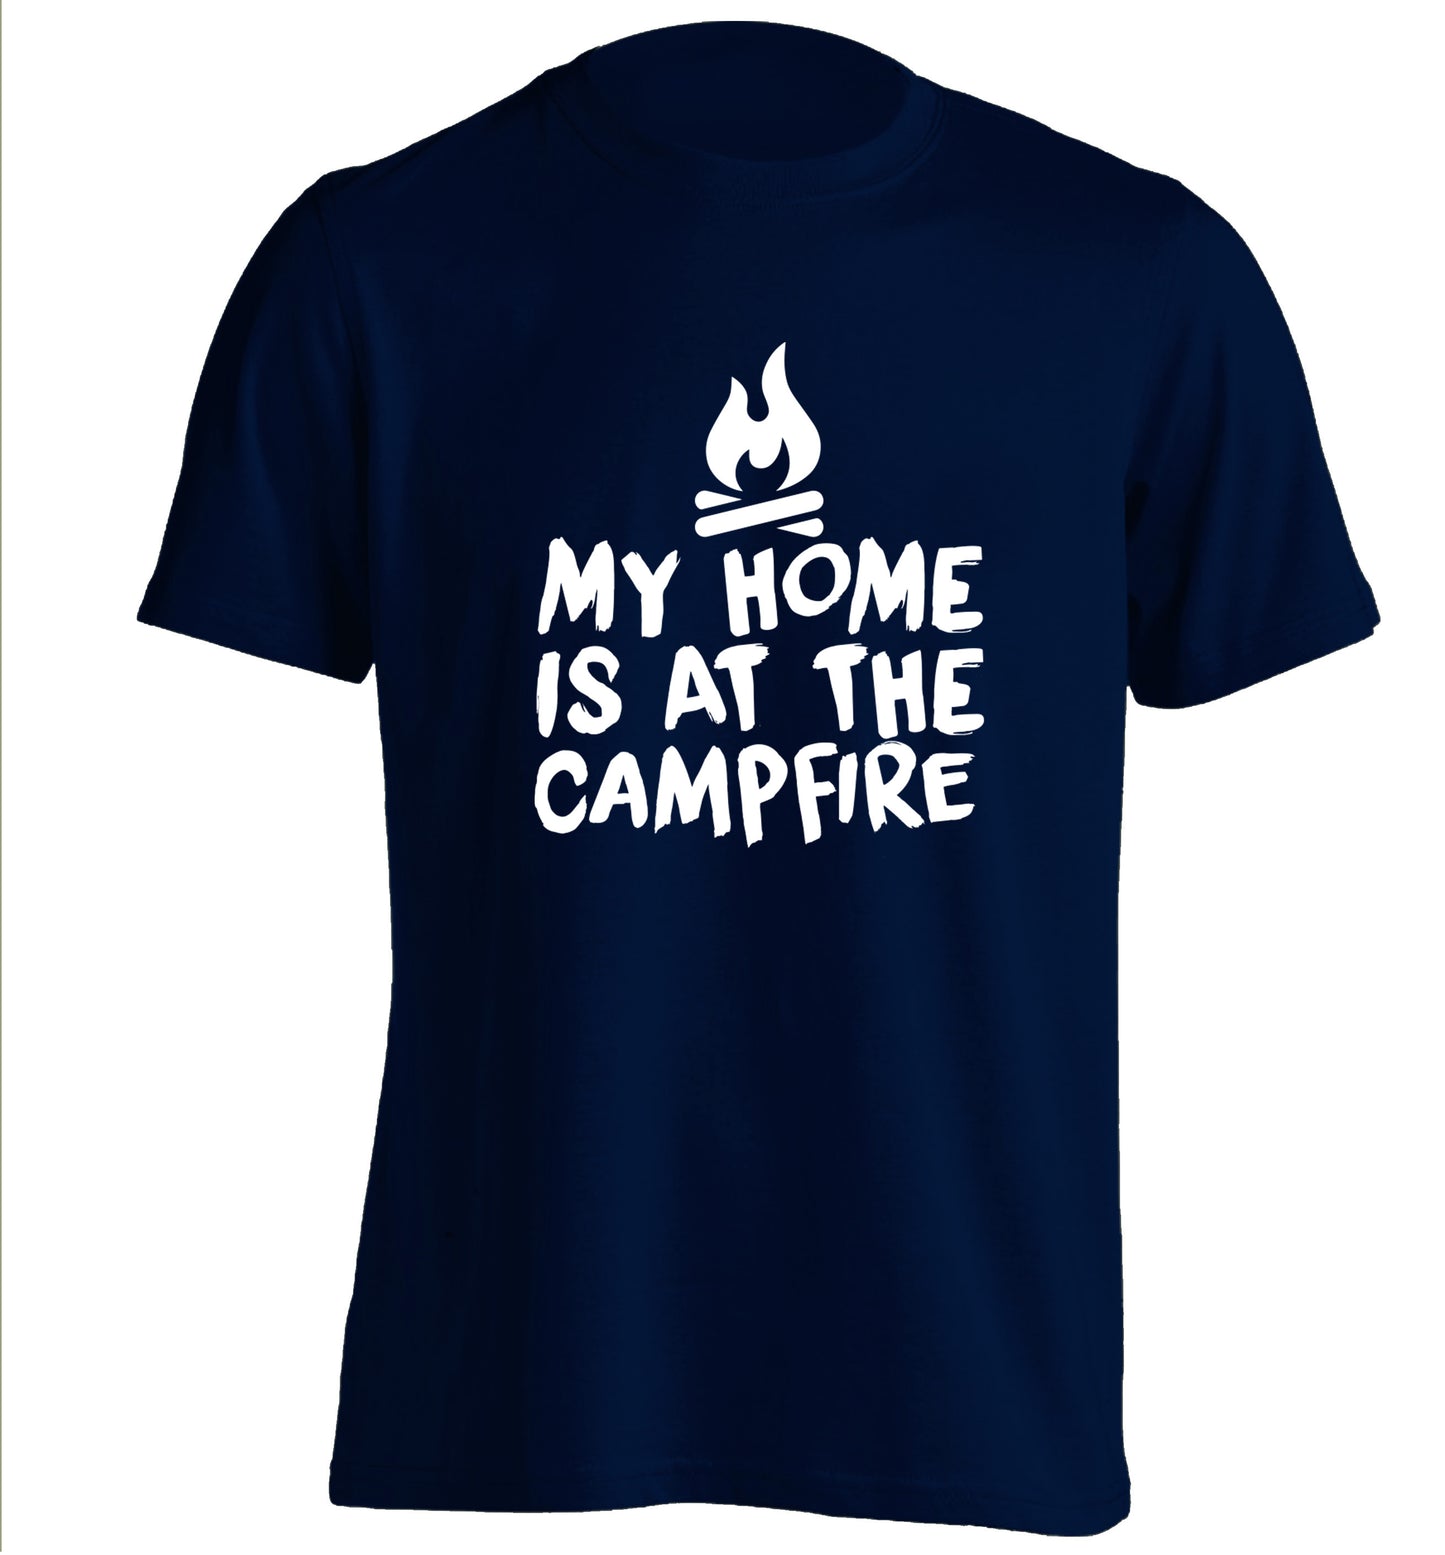 My home is at the campfire adults unisex navy Tshirt 2XL